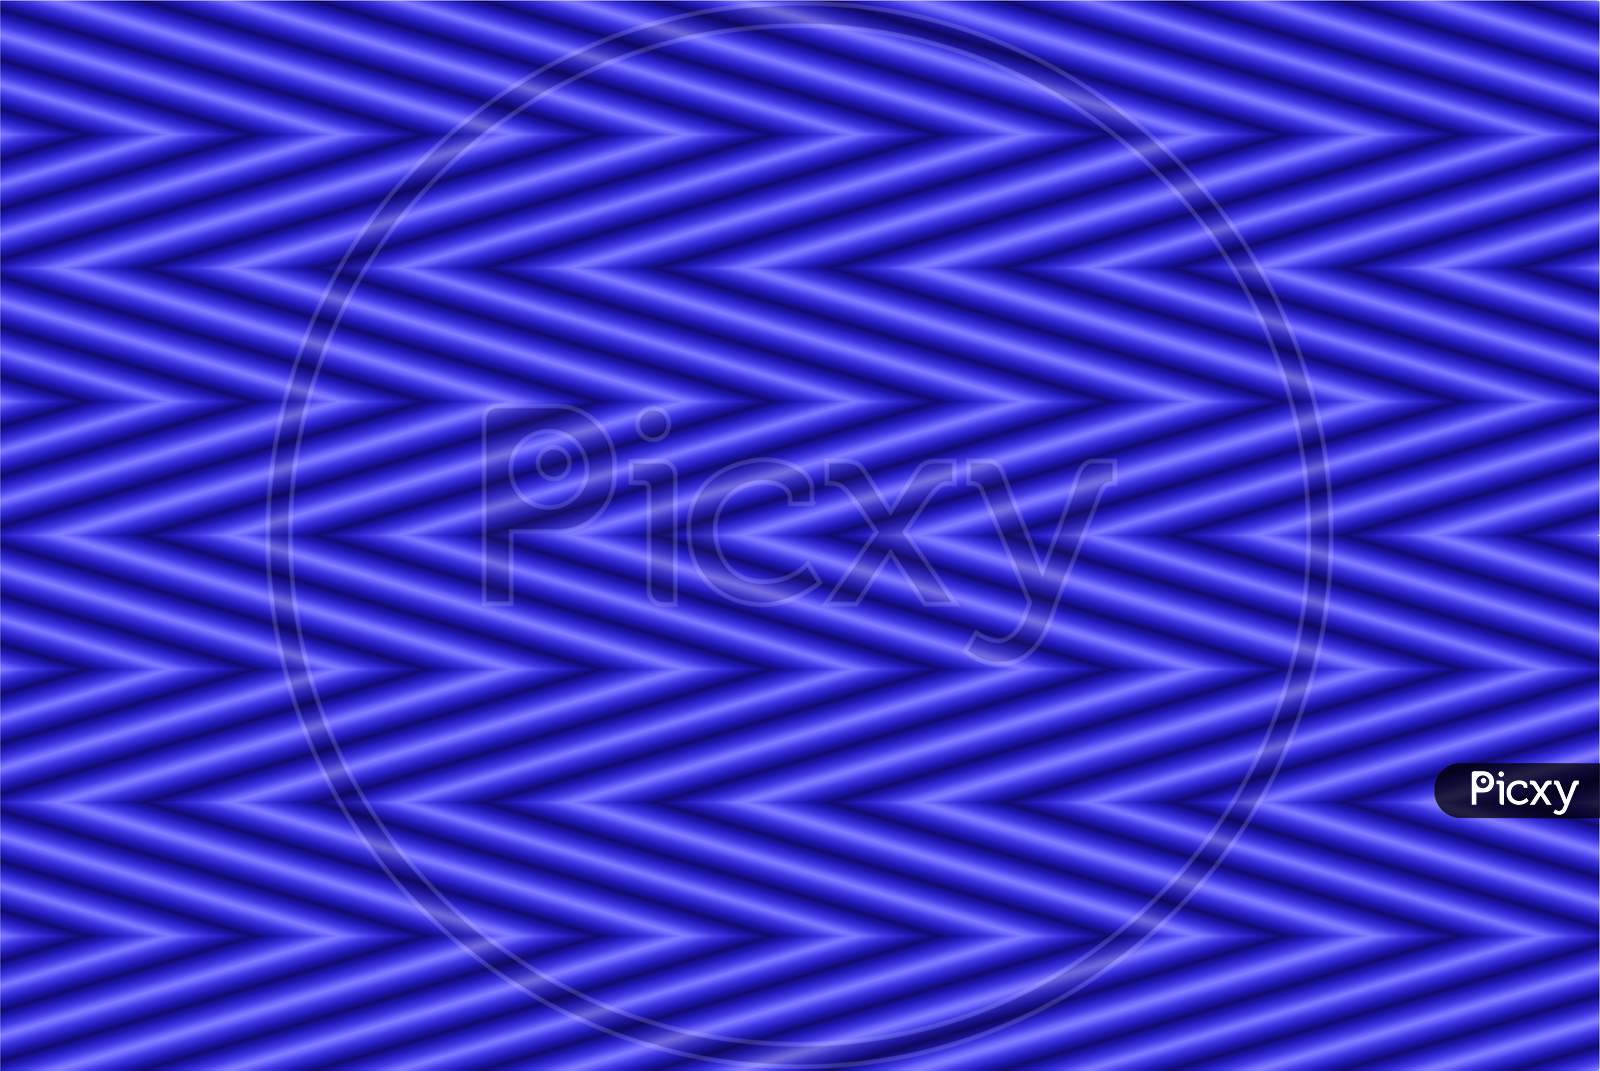 Geometrical seamless zig zag pattern with 3d illusion. Abstract blue color leheriya pattern. cylindrical zigzag background. chevron style.